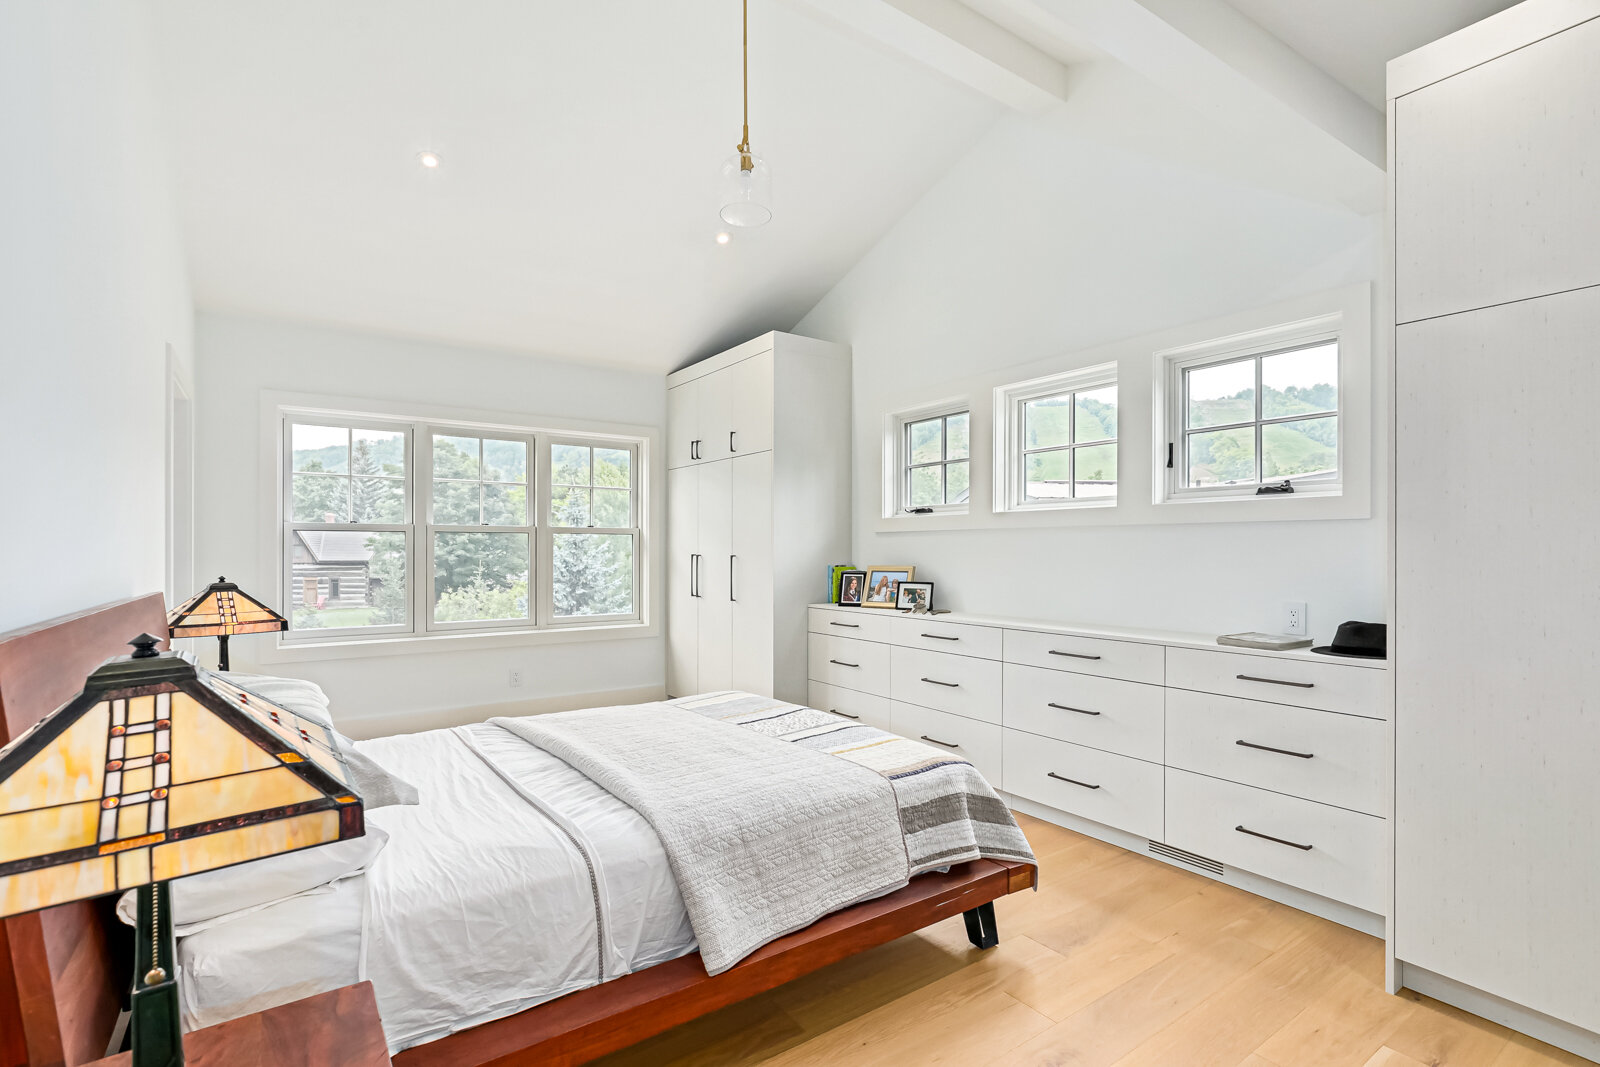 For this home the clients opted for built-ins rather than having a walk-in closet. 🗄️ The walk-in closet is something synonymous with luxury and space but when you can set up your master bedroom with built-ins that look like this, I'd disagree! It's